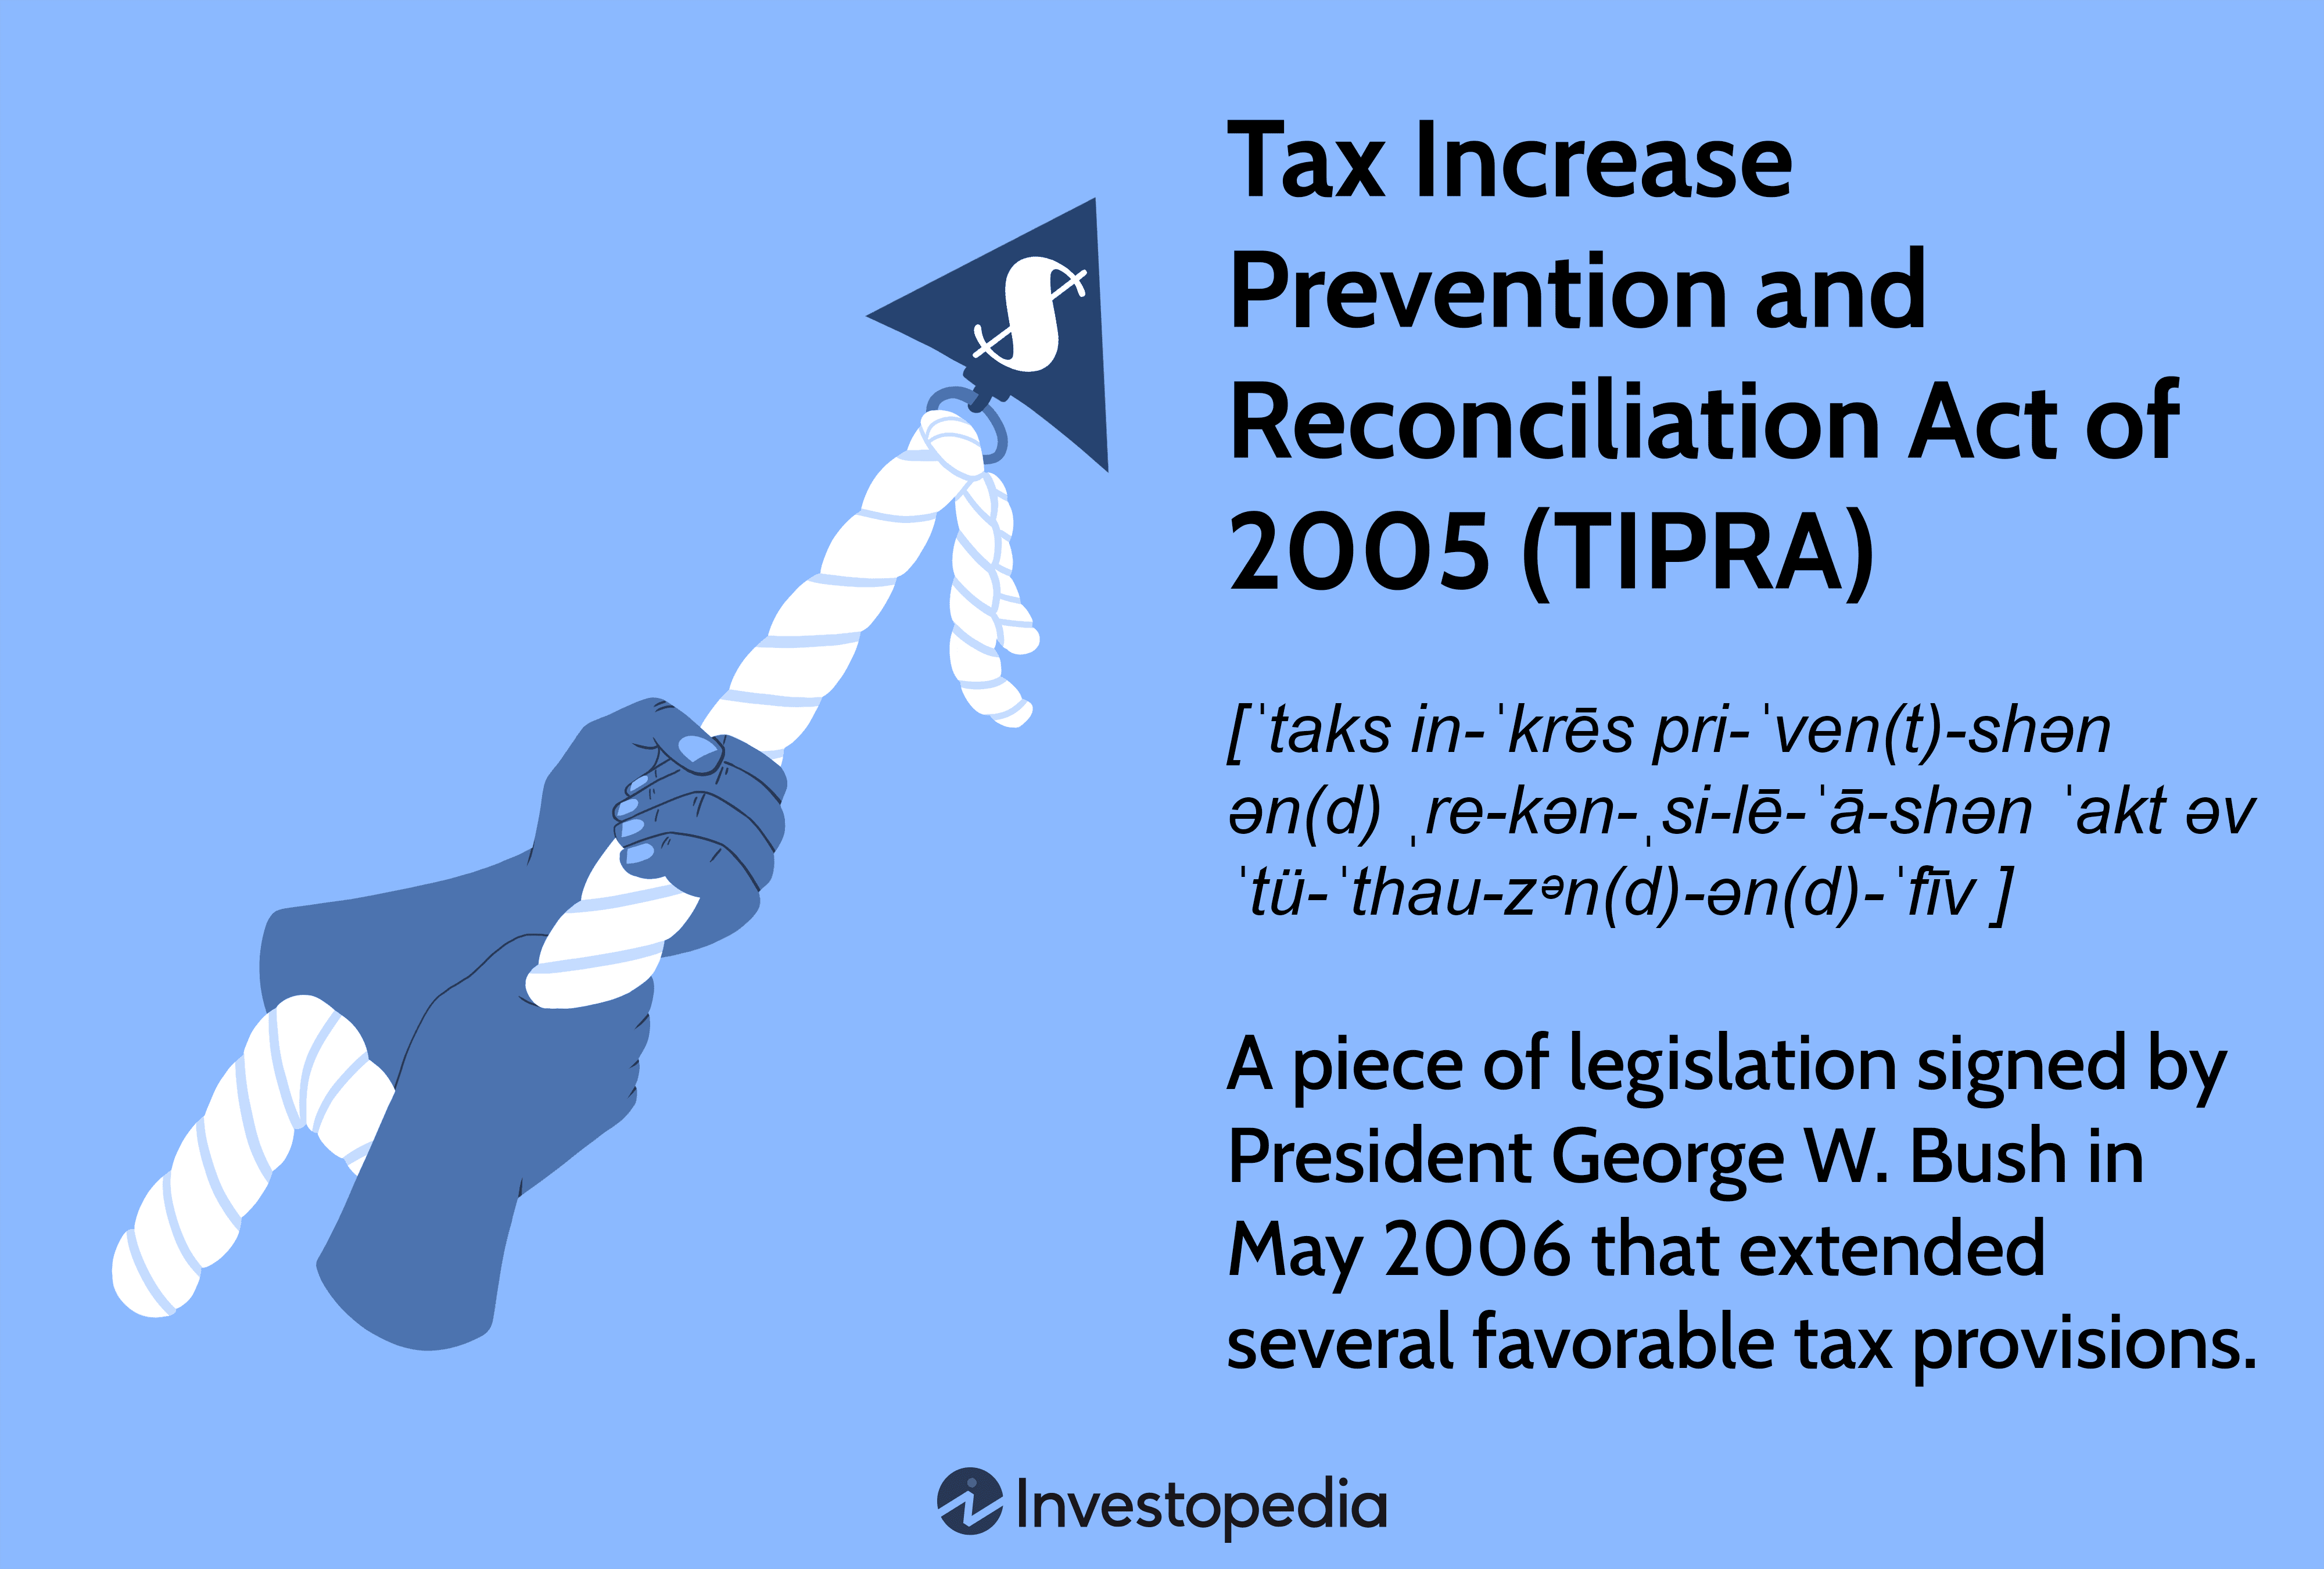 Tax Increase Prevention and Reconciliation Act of 2005 (TIPRA)